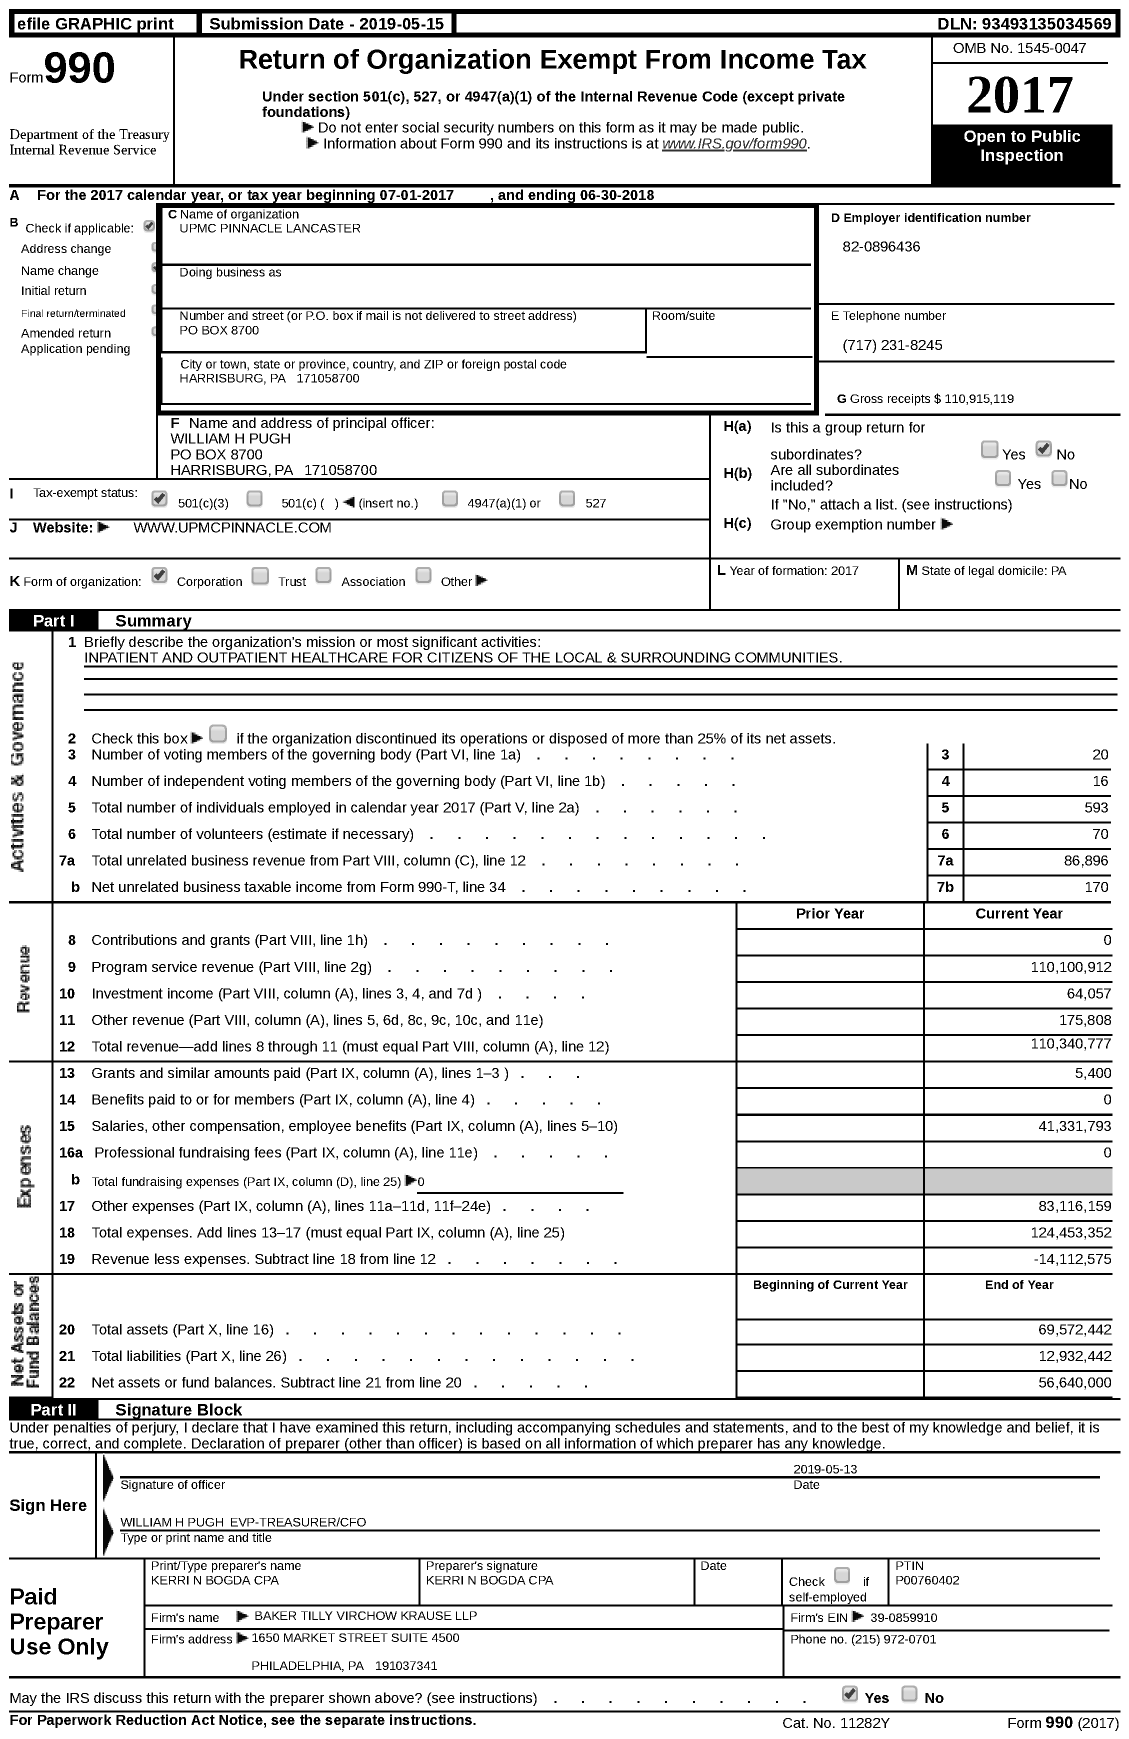 Image of first page of 2017 Form 990 for Upmc Pinnacle Lancaster